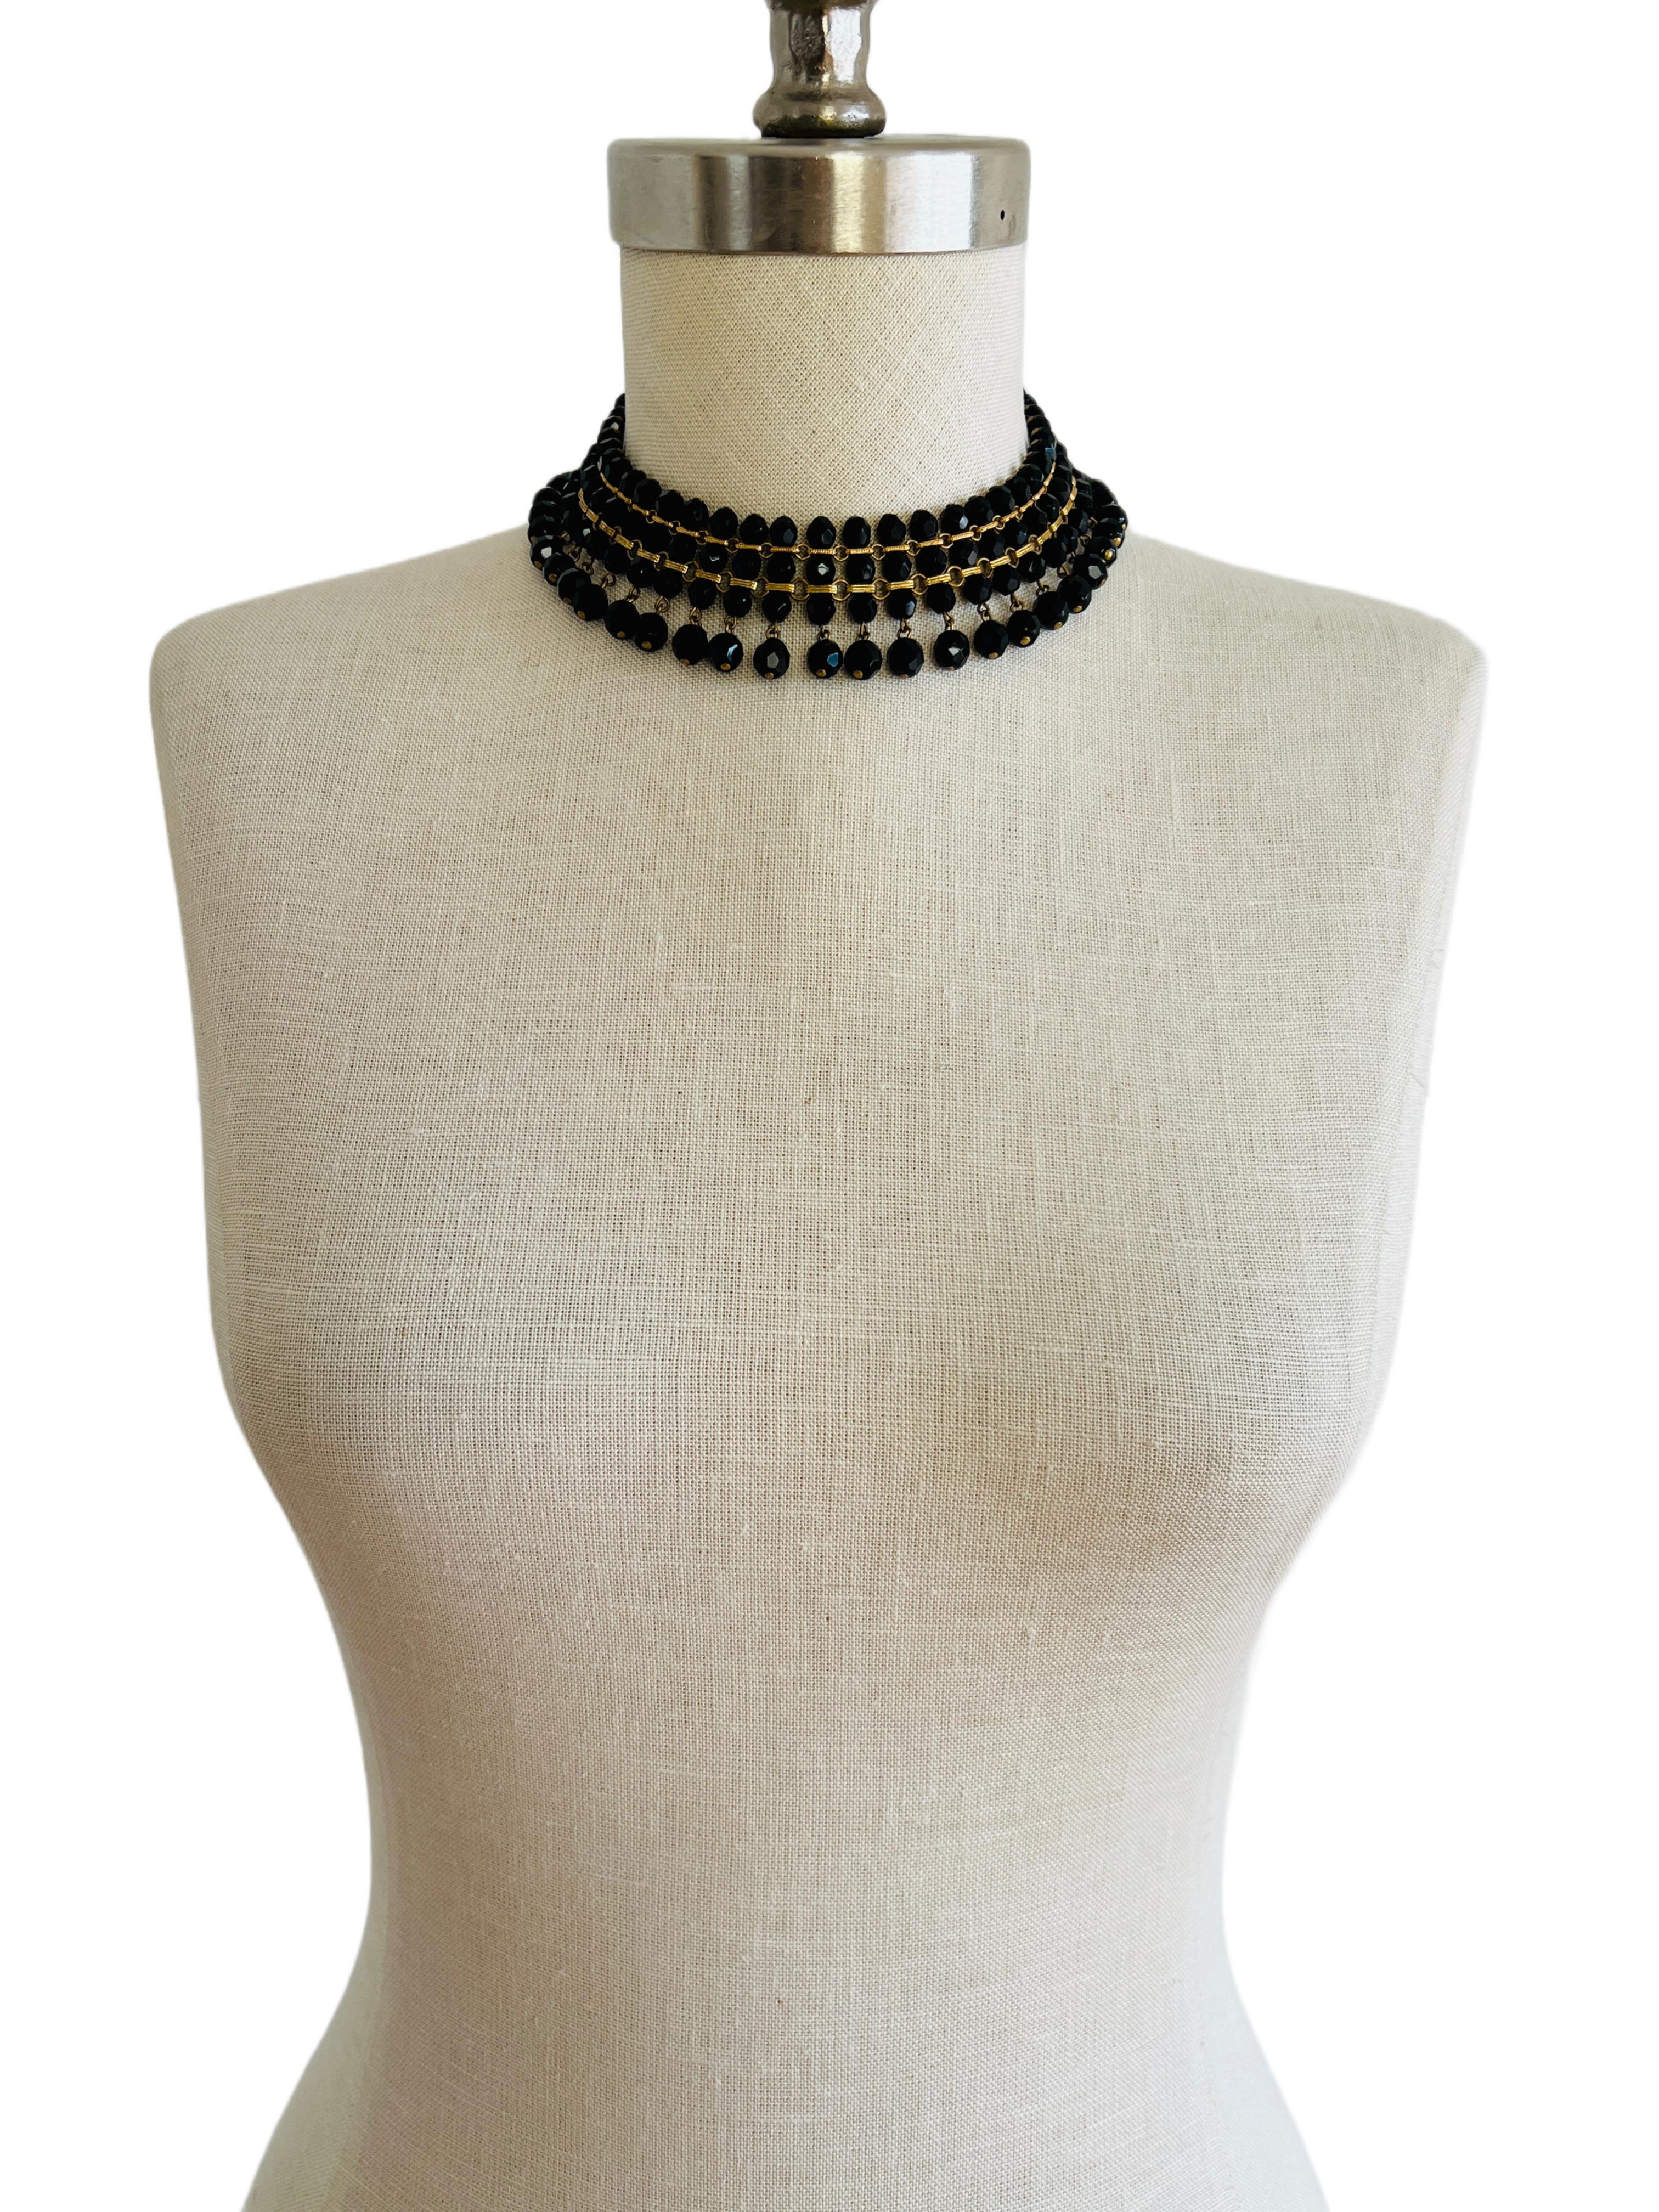 This elegant black choker necklace is well-constructed and layers nicely on the neck.

Size: 16.5